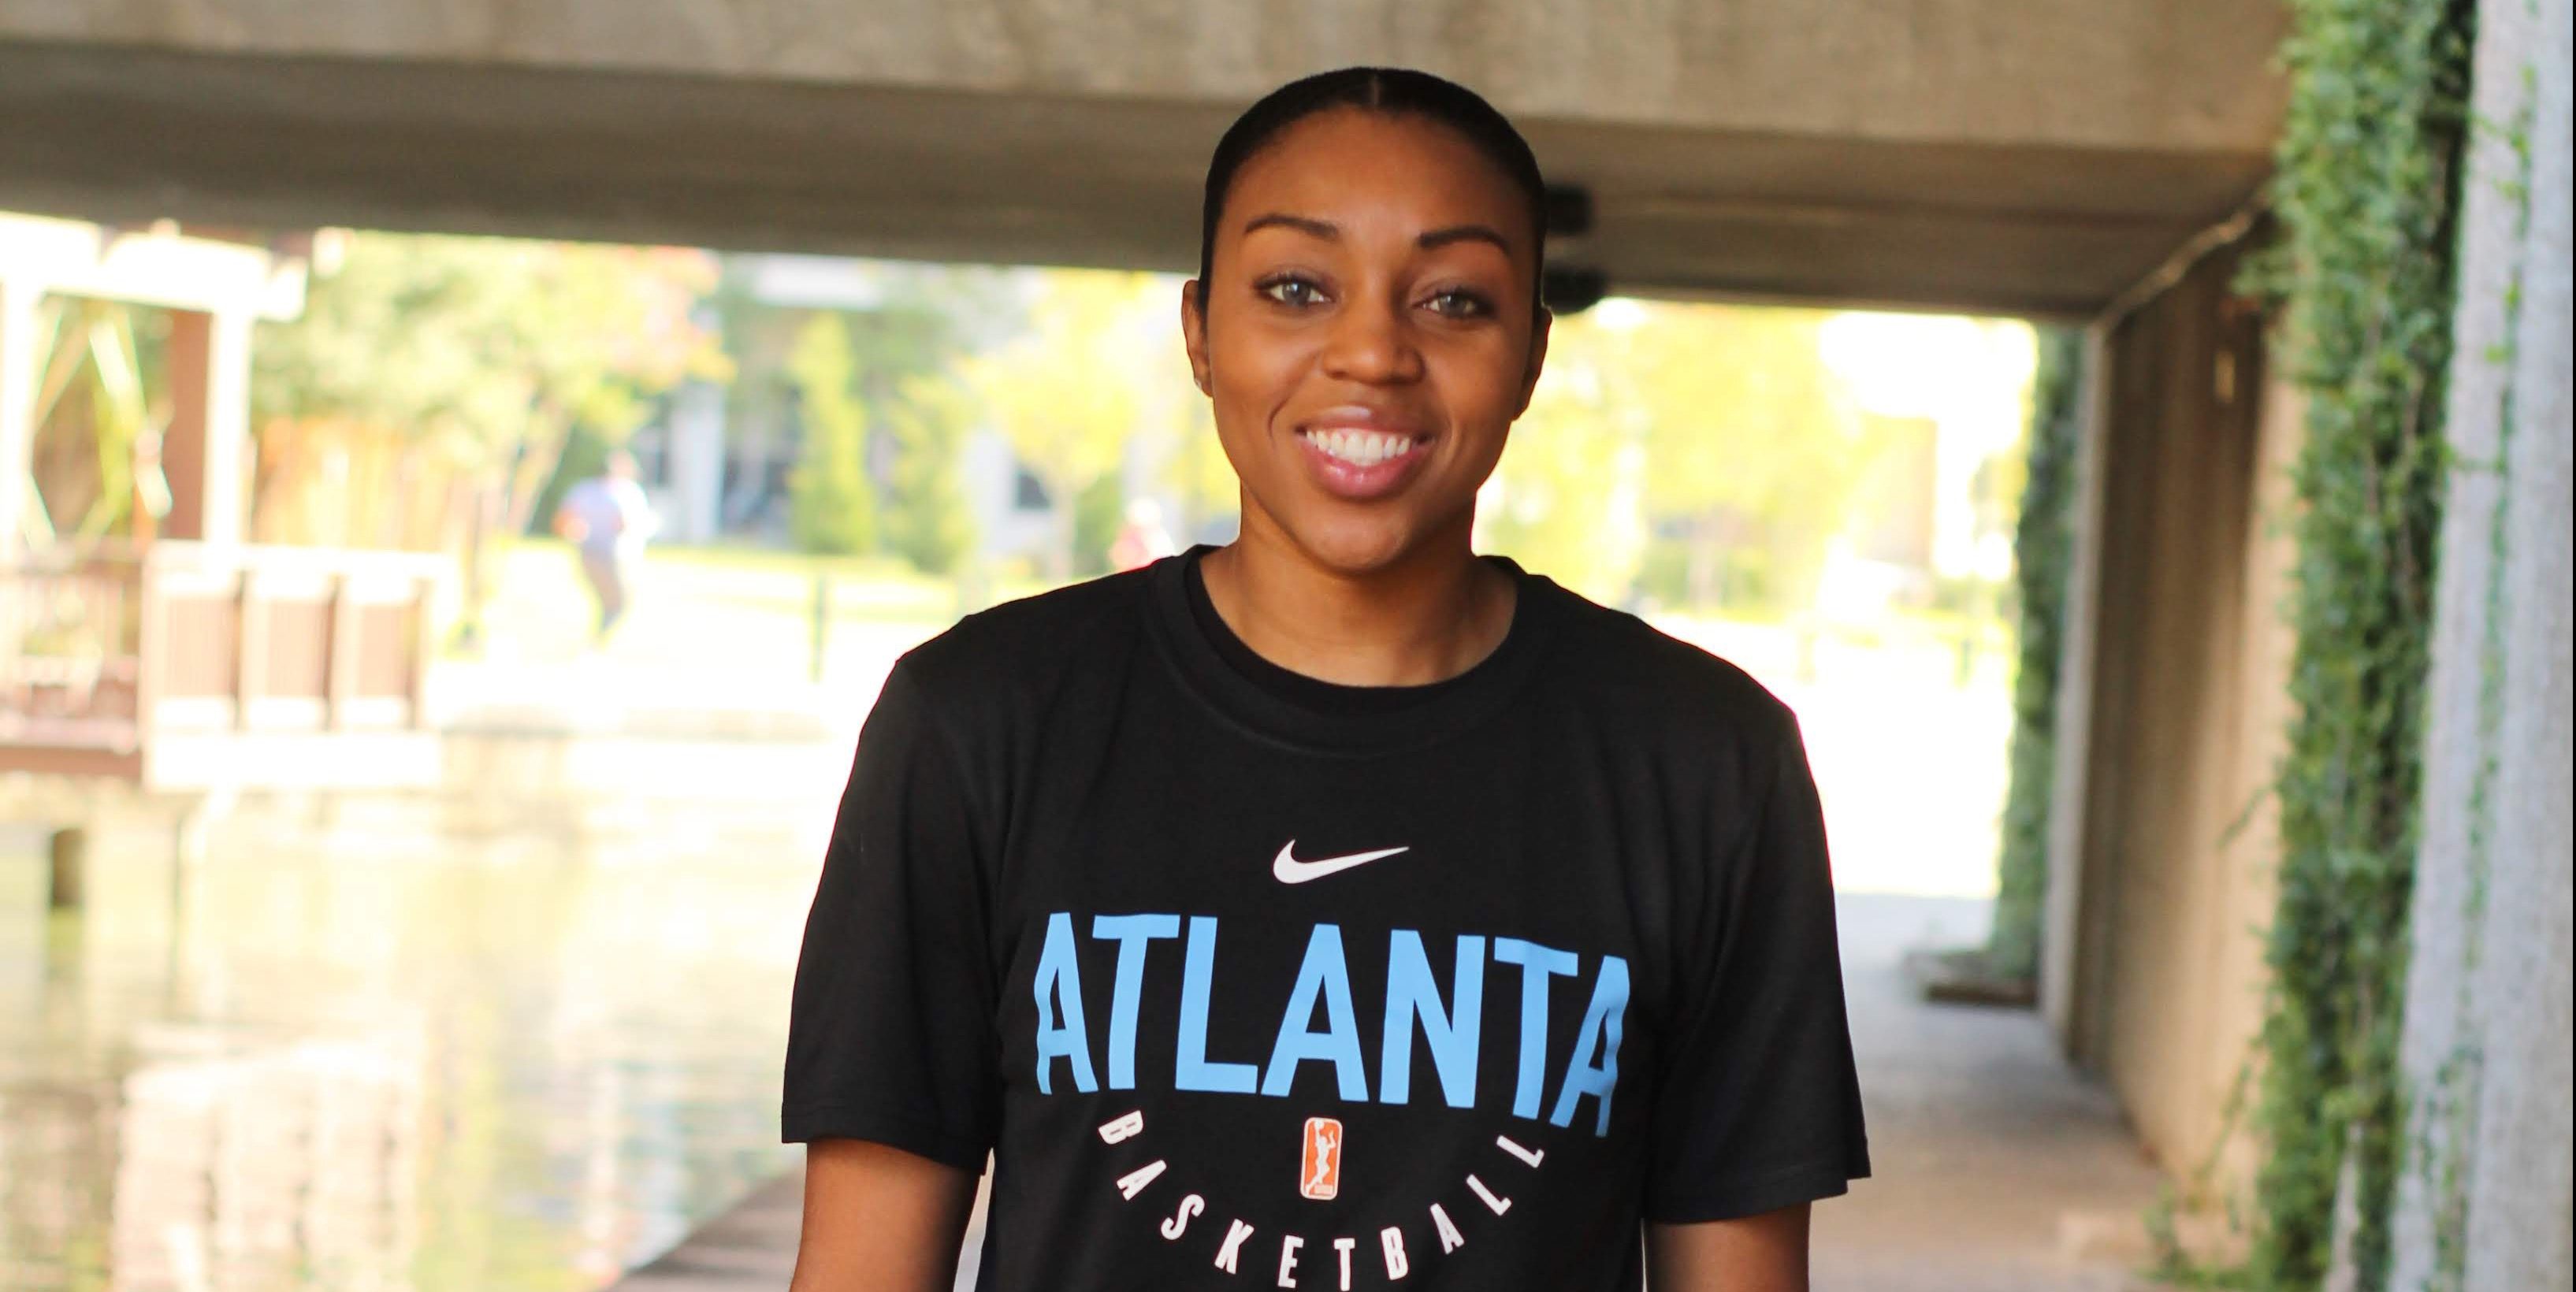 Former Atlanta Dream star Renee Montgomery will serve as an executive for the team, making her the first former player to serve as an owner and an executive of a WNBA team. (Courtesy of Renee Montgomery)